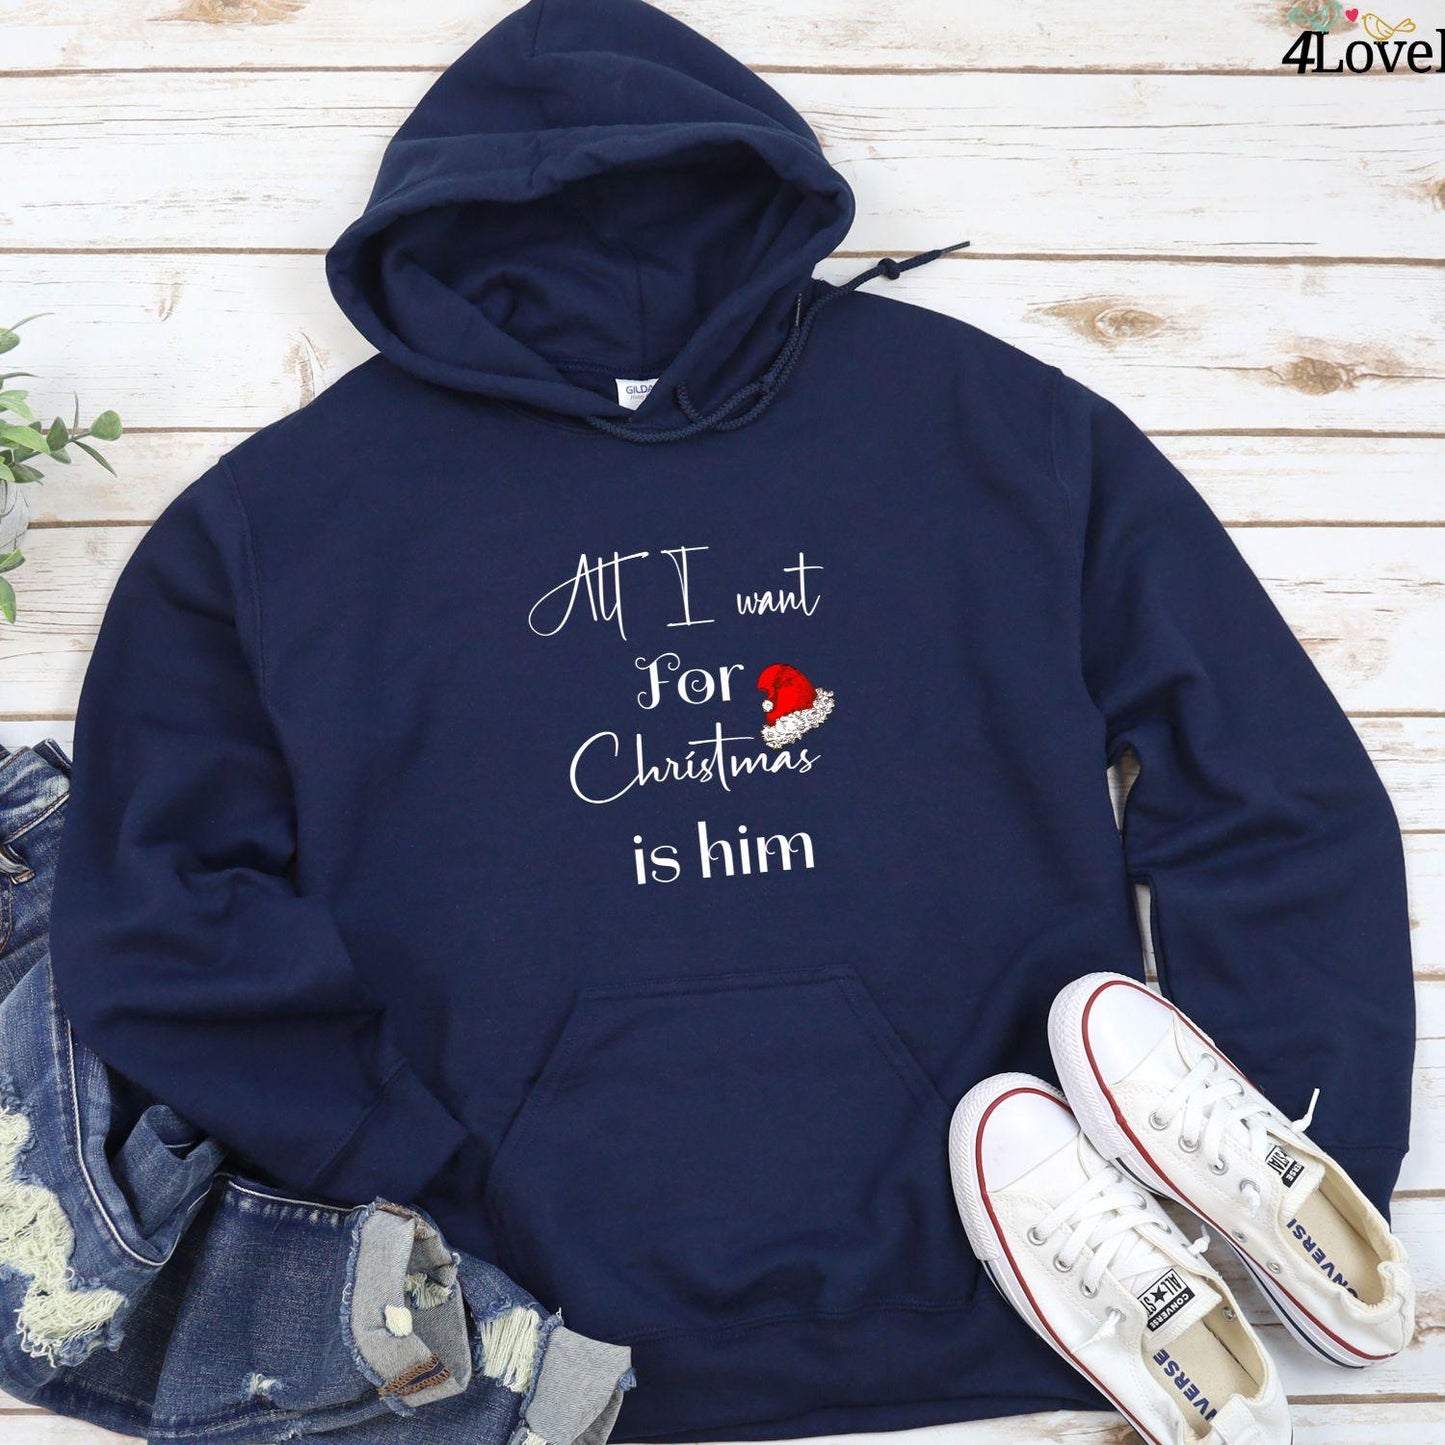 Christmas Matching Set: All I Want for Christmas is Him/Her - Perfect Festive Outfits - 4Lovebirds